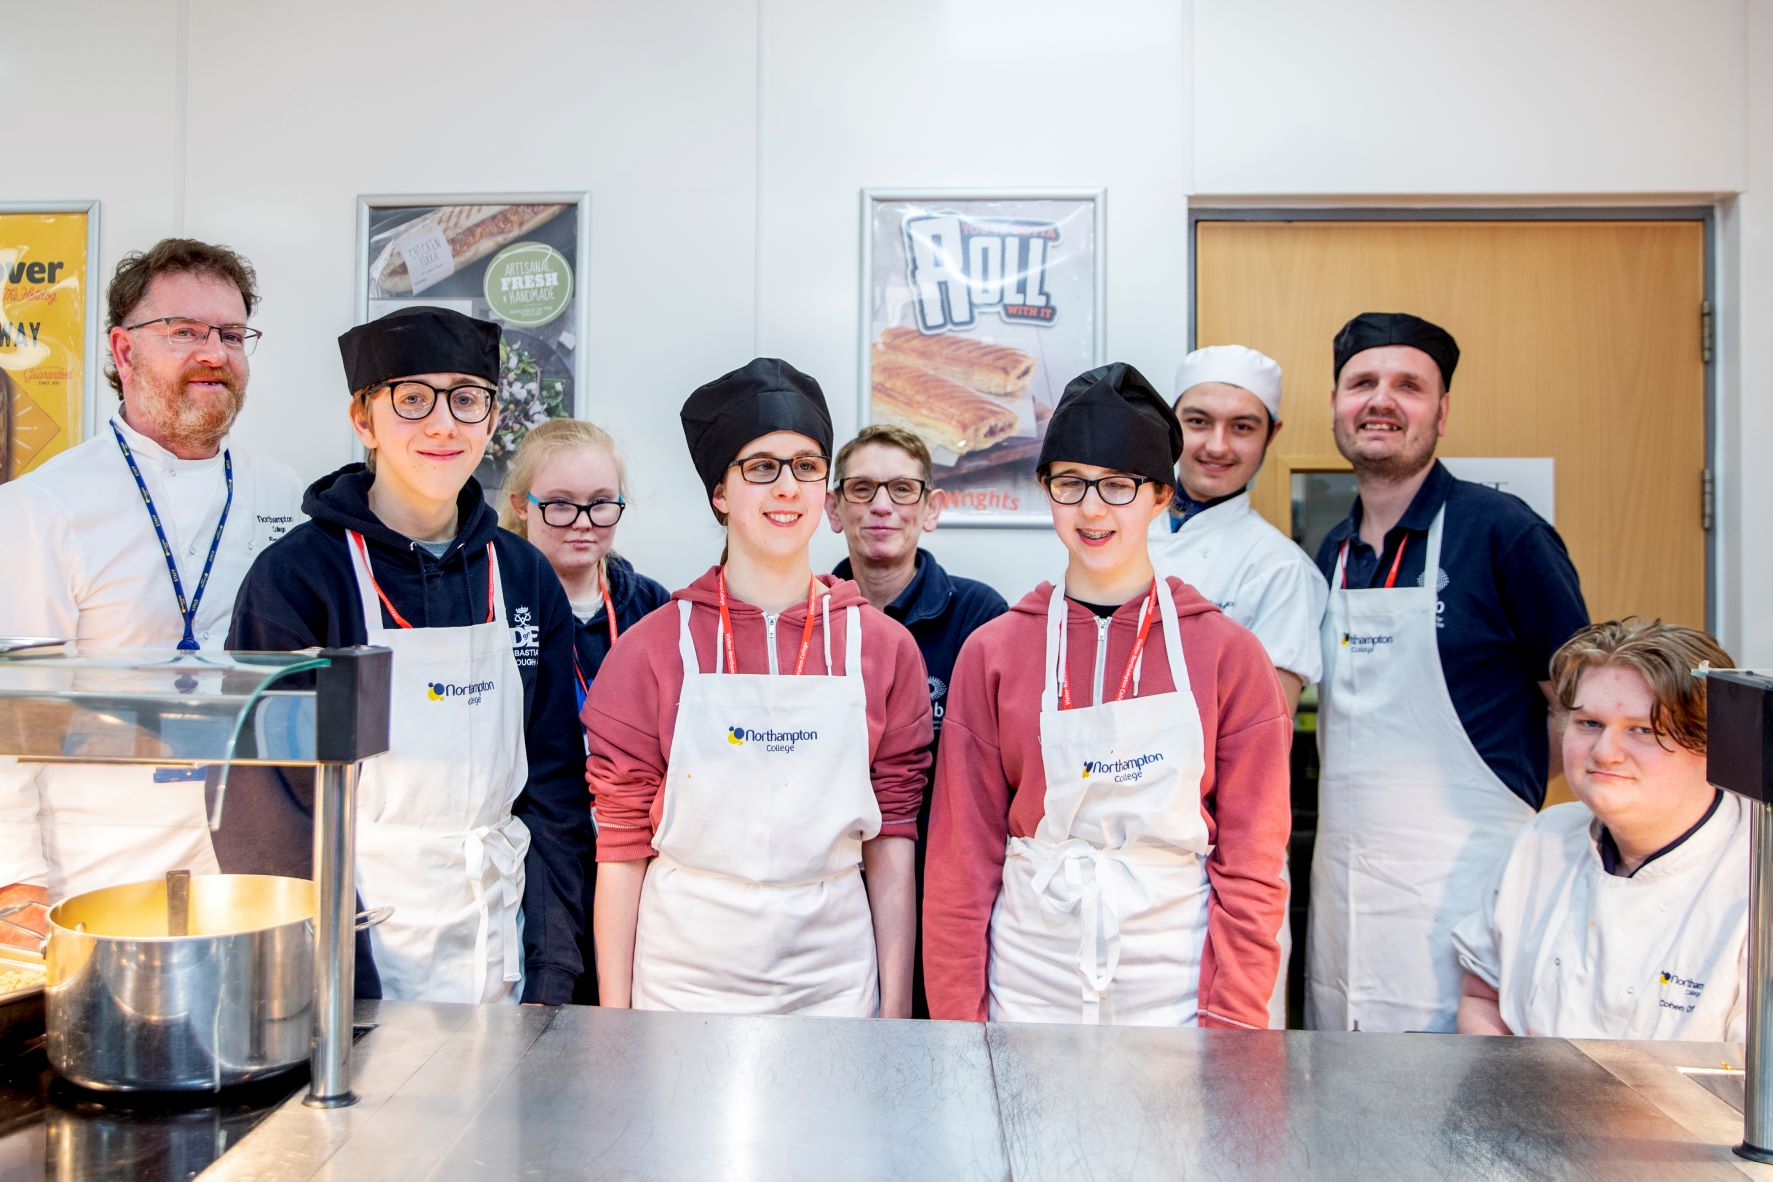 Northampton College catering students and NAB visitors posing in college kitchen